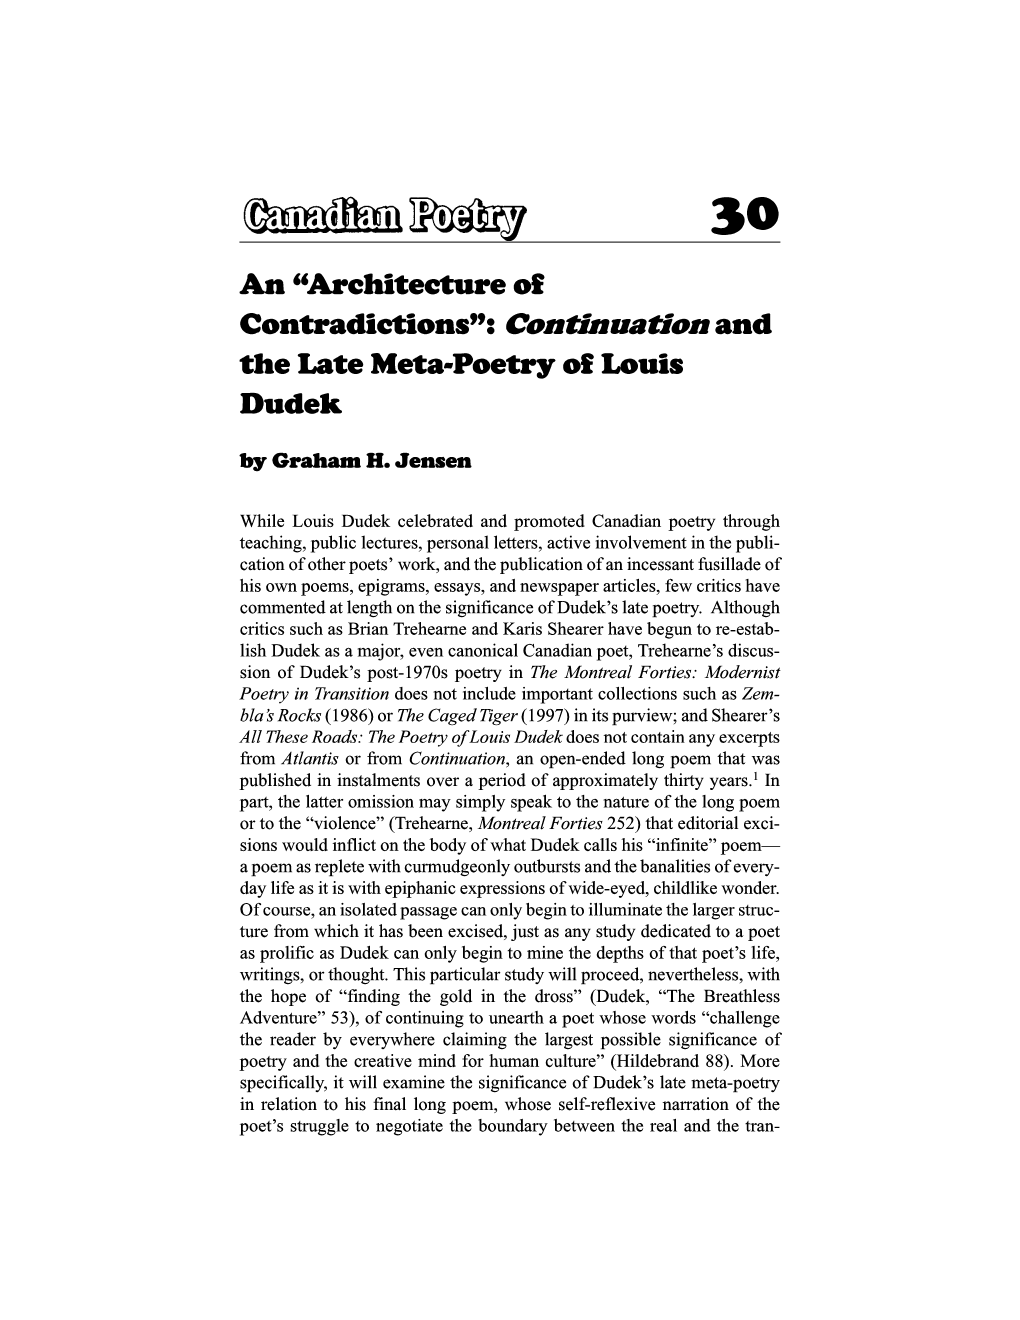 Contradictions": Cdlltinua6dii and the Late Meta-Poetry 01 Louis Dudek by Grabam H